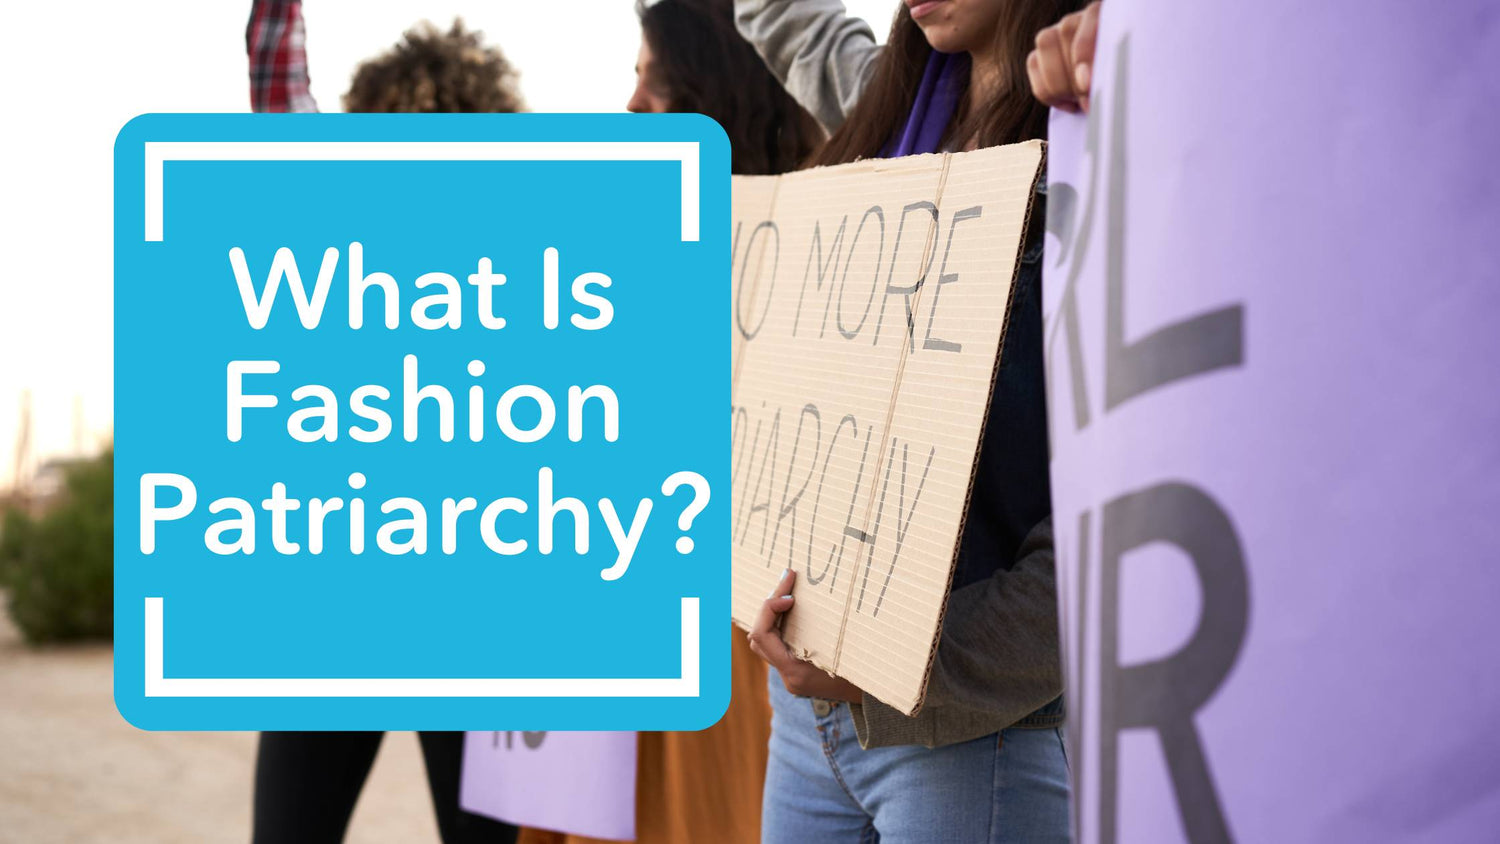 Welcome To The Fashion Patriarchy